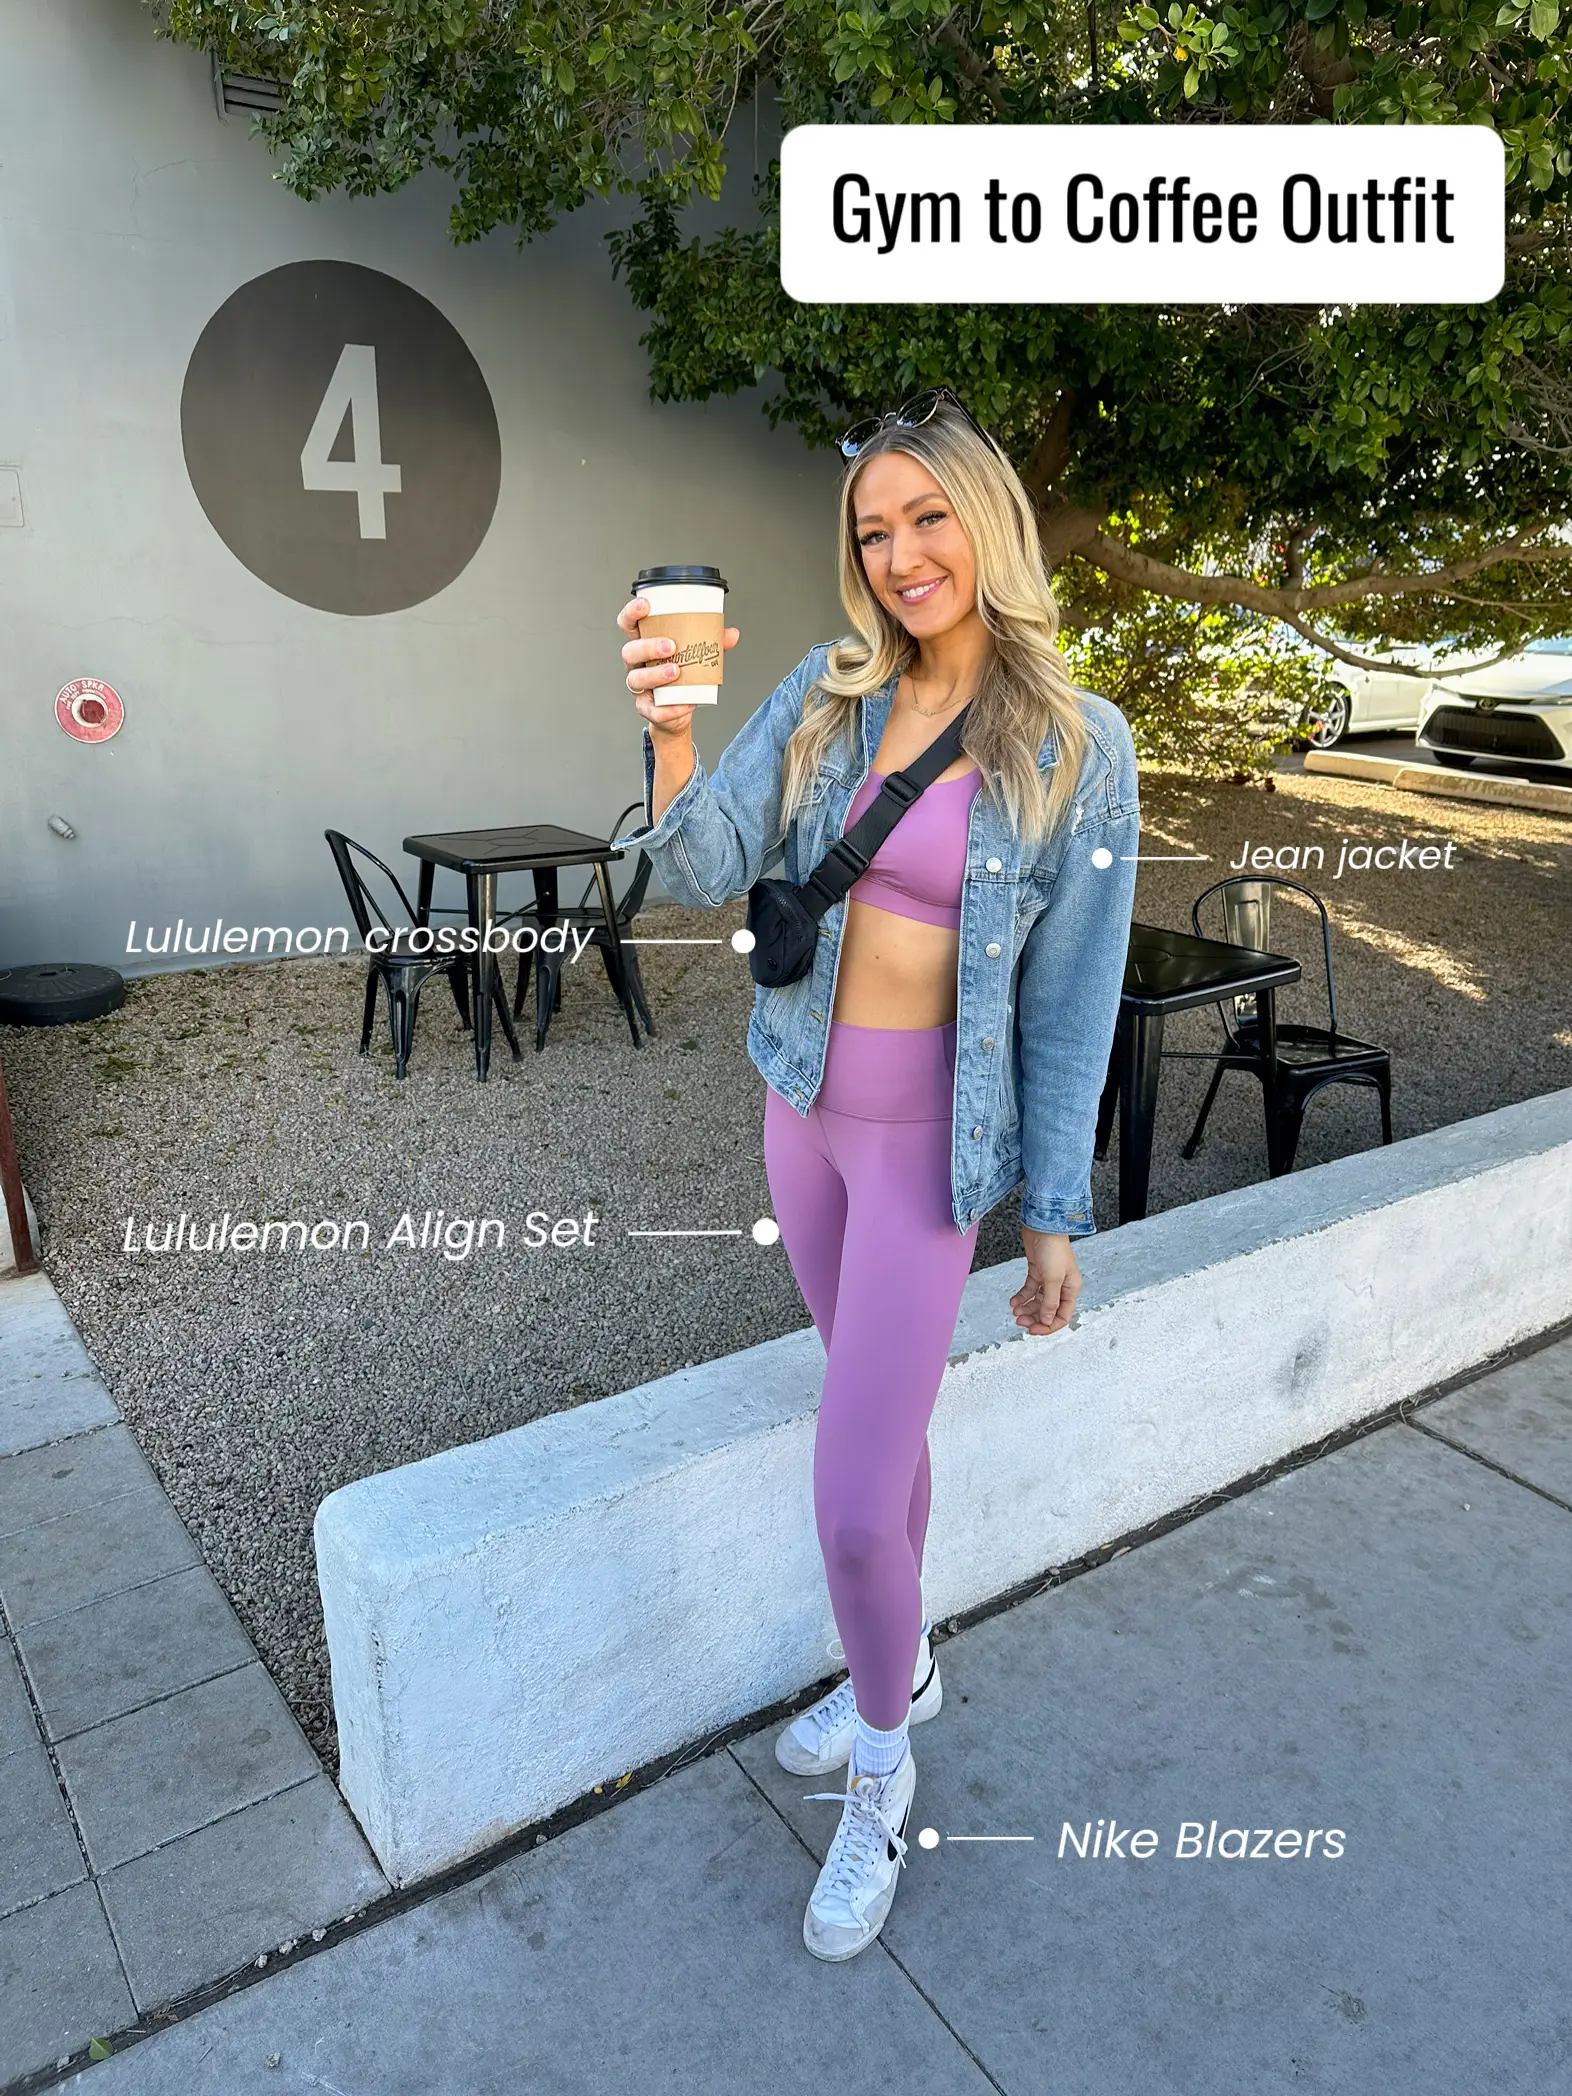 Gym to Coffee Outfit Idea, Gallery posted by Jess Hutchens